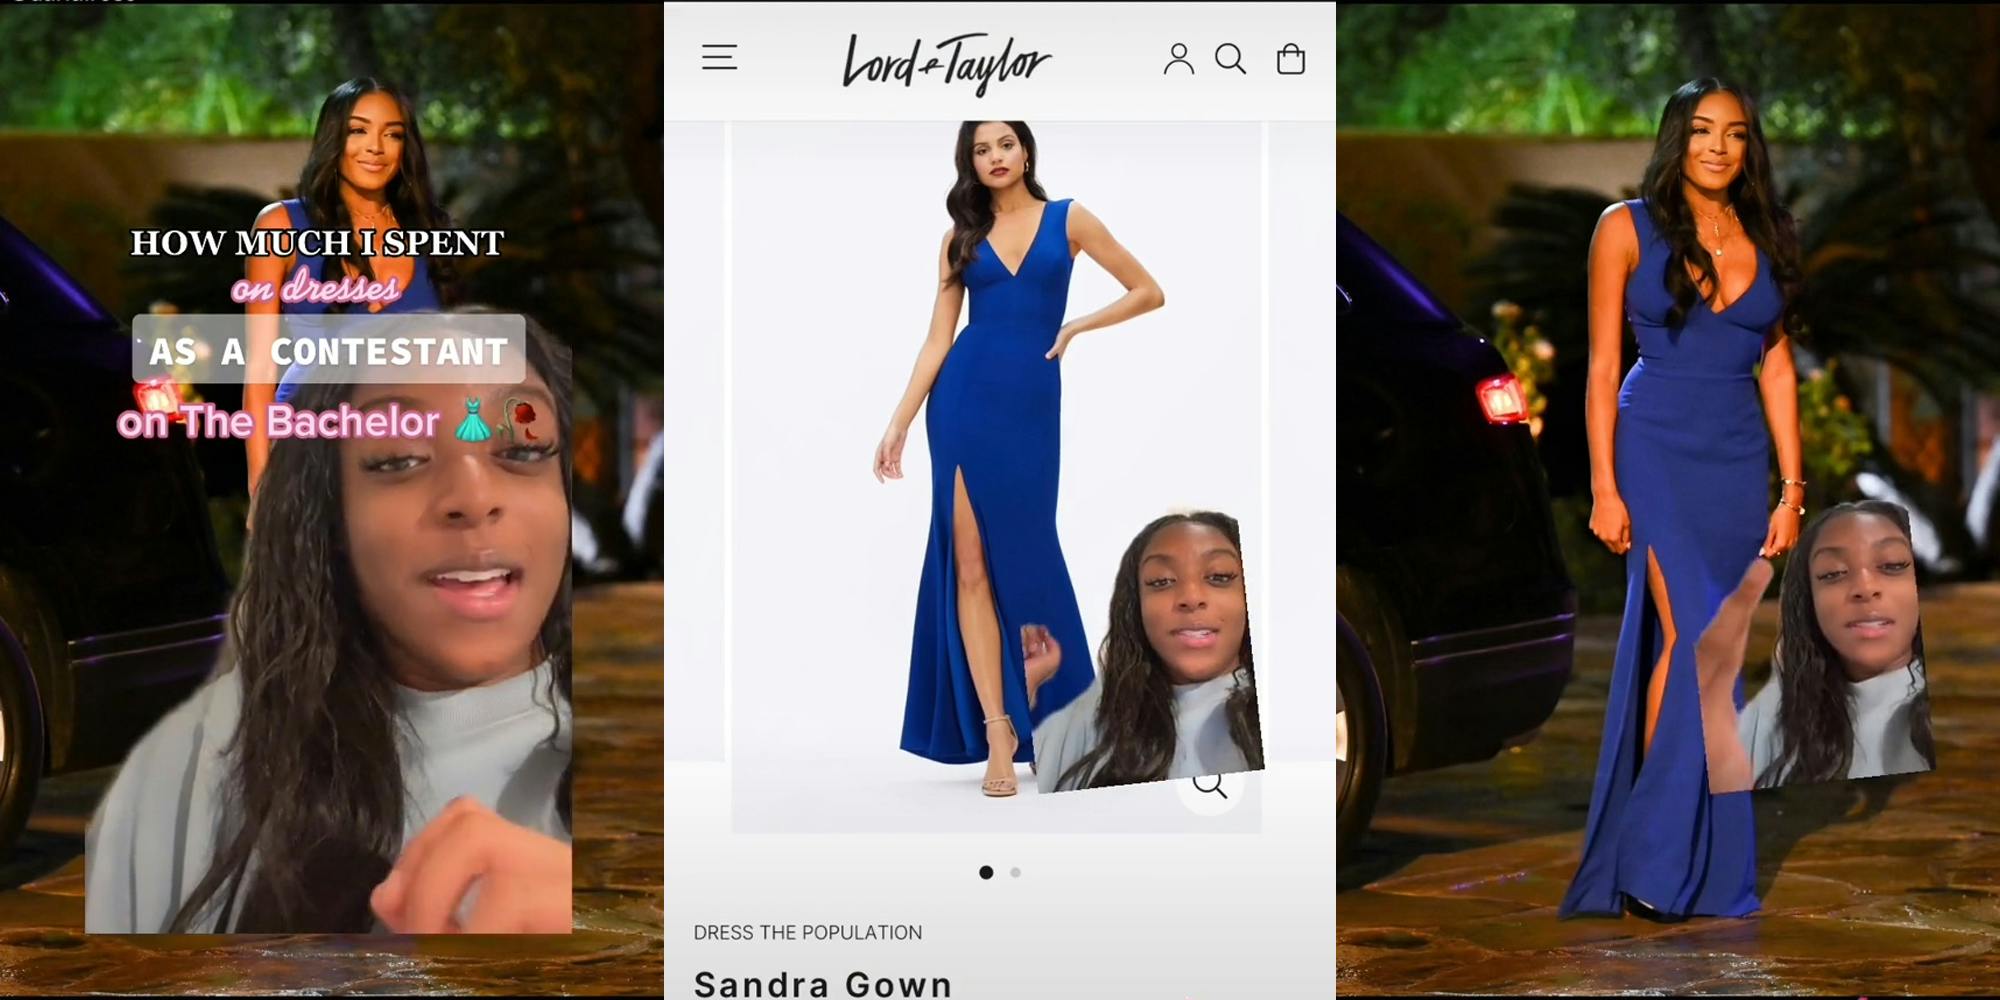 young woman with caption "how much i spent on dresses as a contestant on The Bachelor" (l) same woman with Lord & Taylor listing of dress (c) young woman with background of her wearing the dress (r)